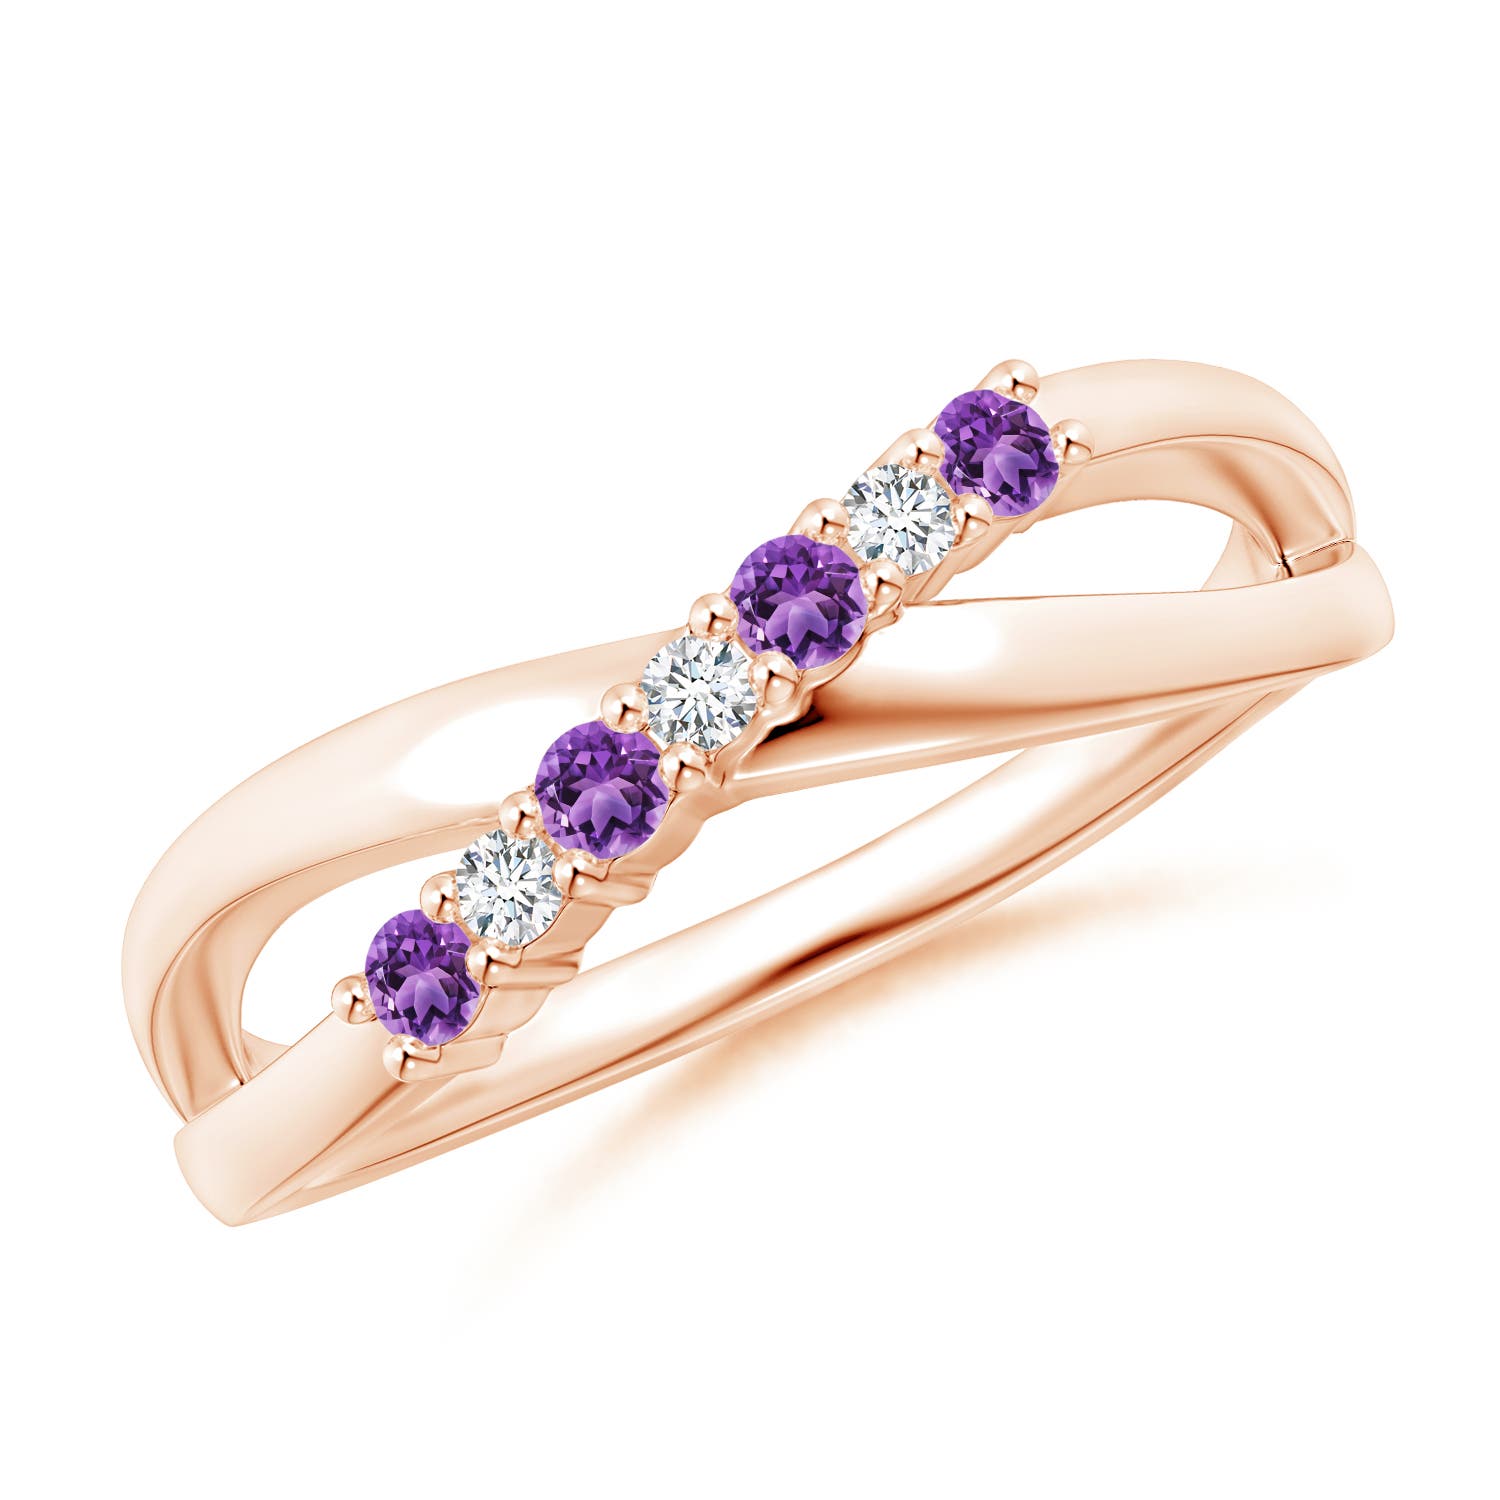 AA - Amethyst / 0.18 CT / 14 KT Rose Gold